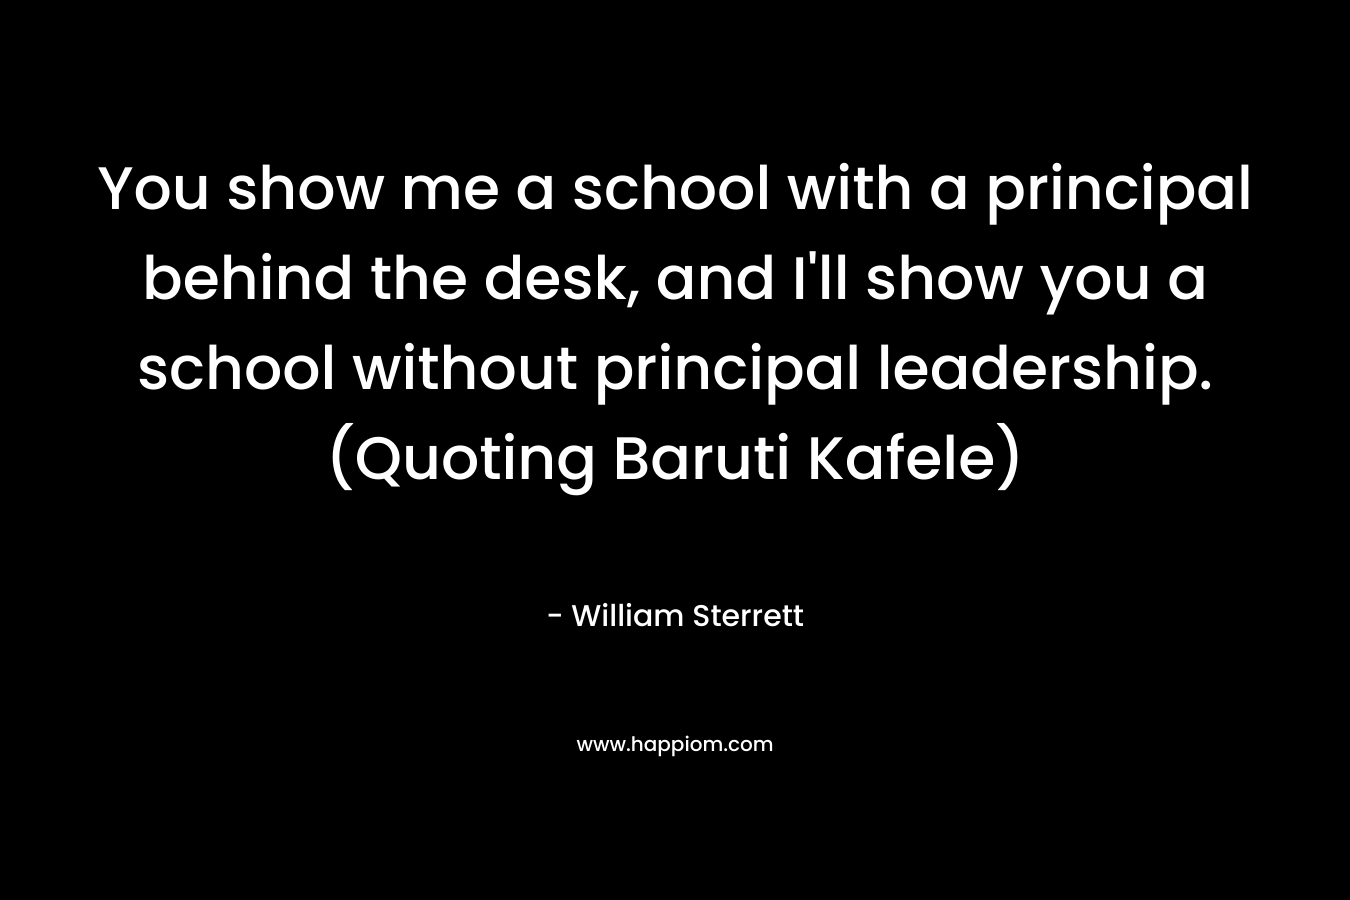 You show me a school with a principal behind the desk, and I'll show you a school without principal leadership. (Quoting Baruti Kafele)